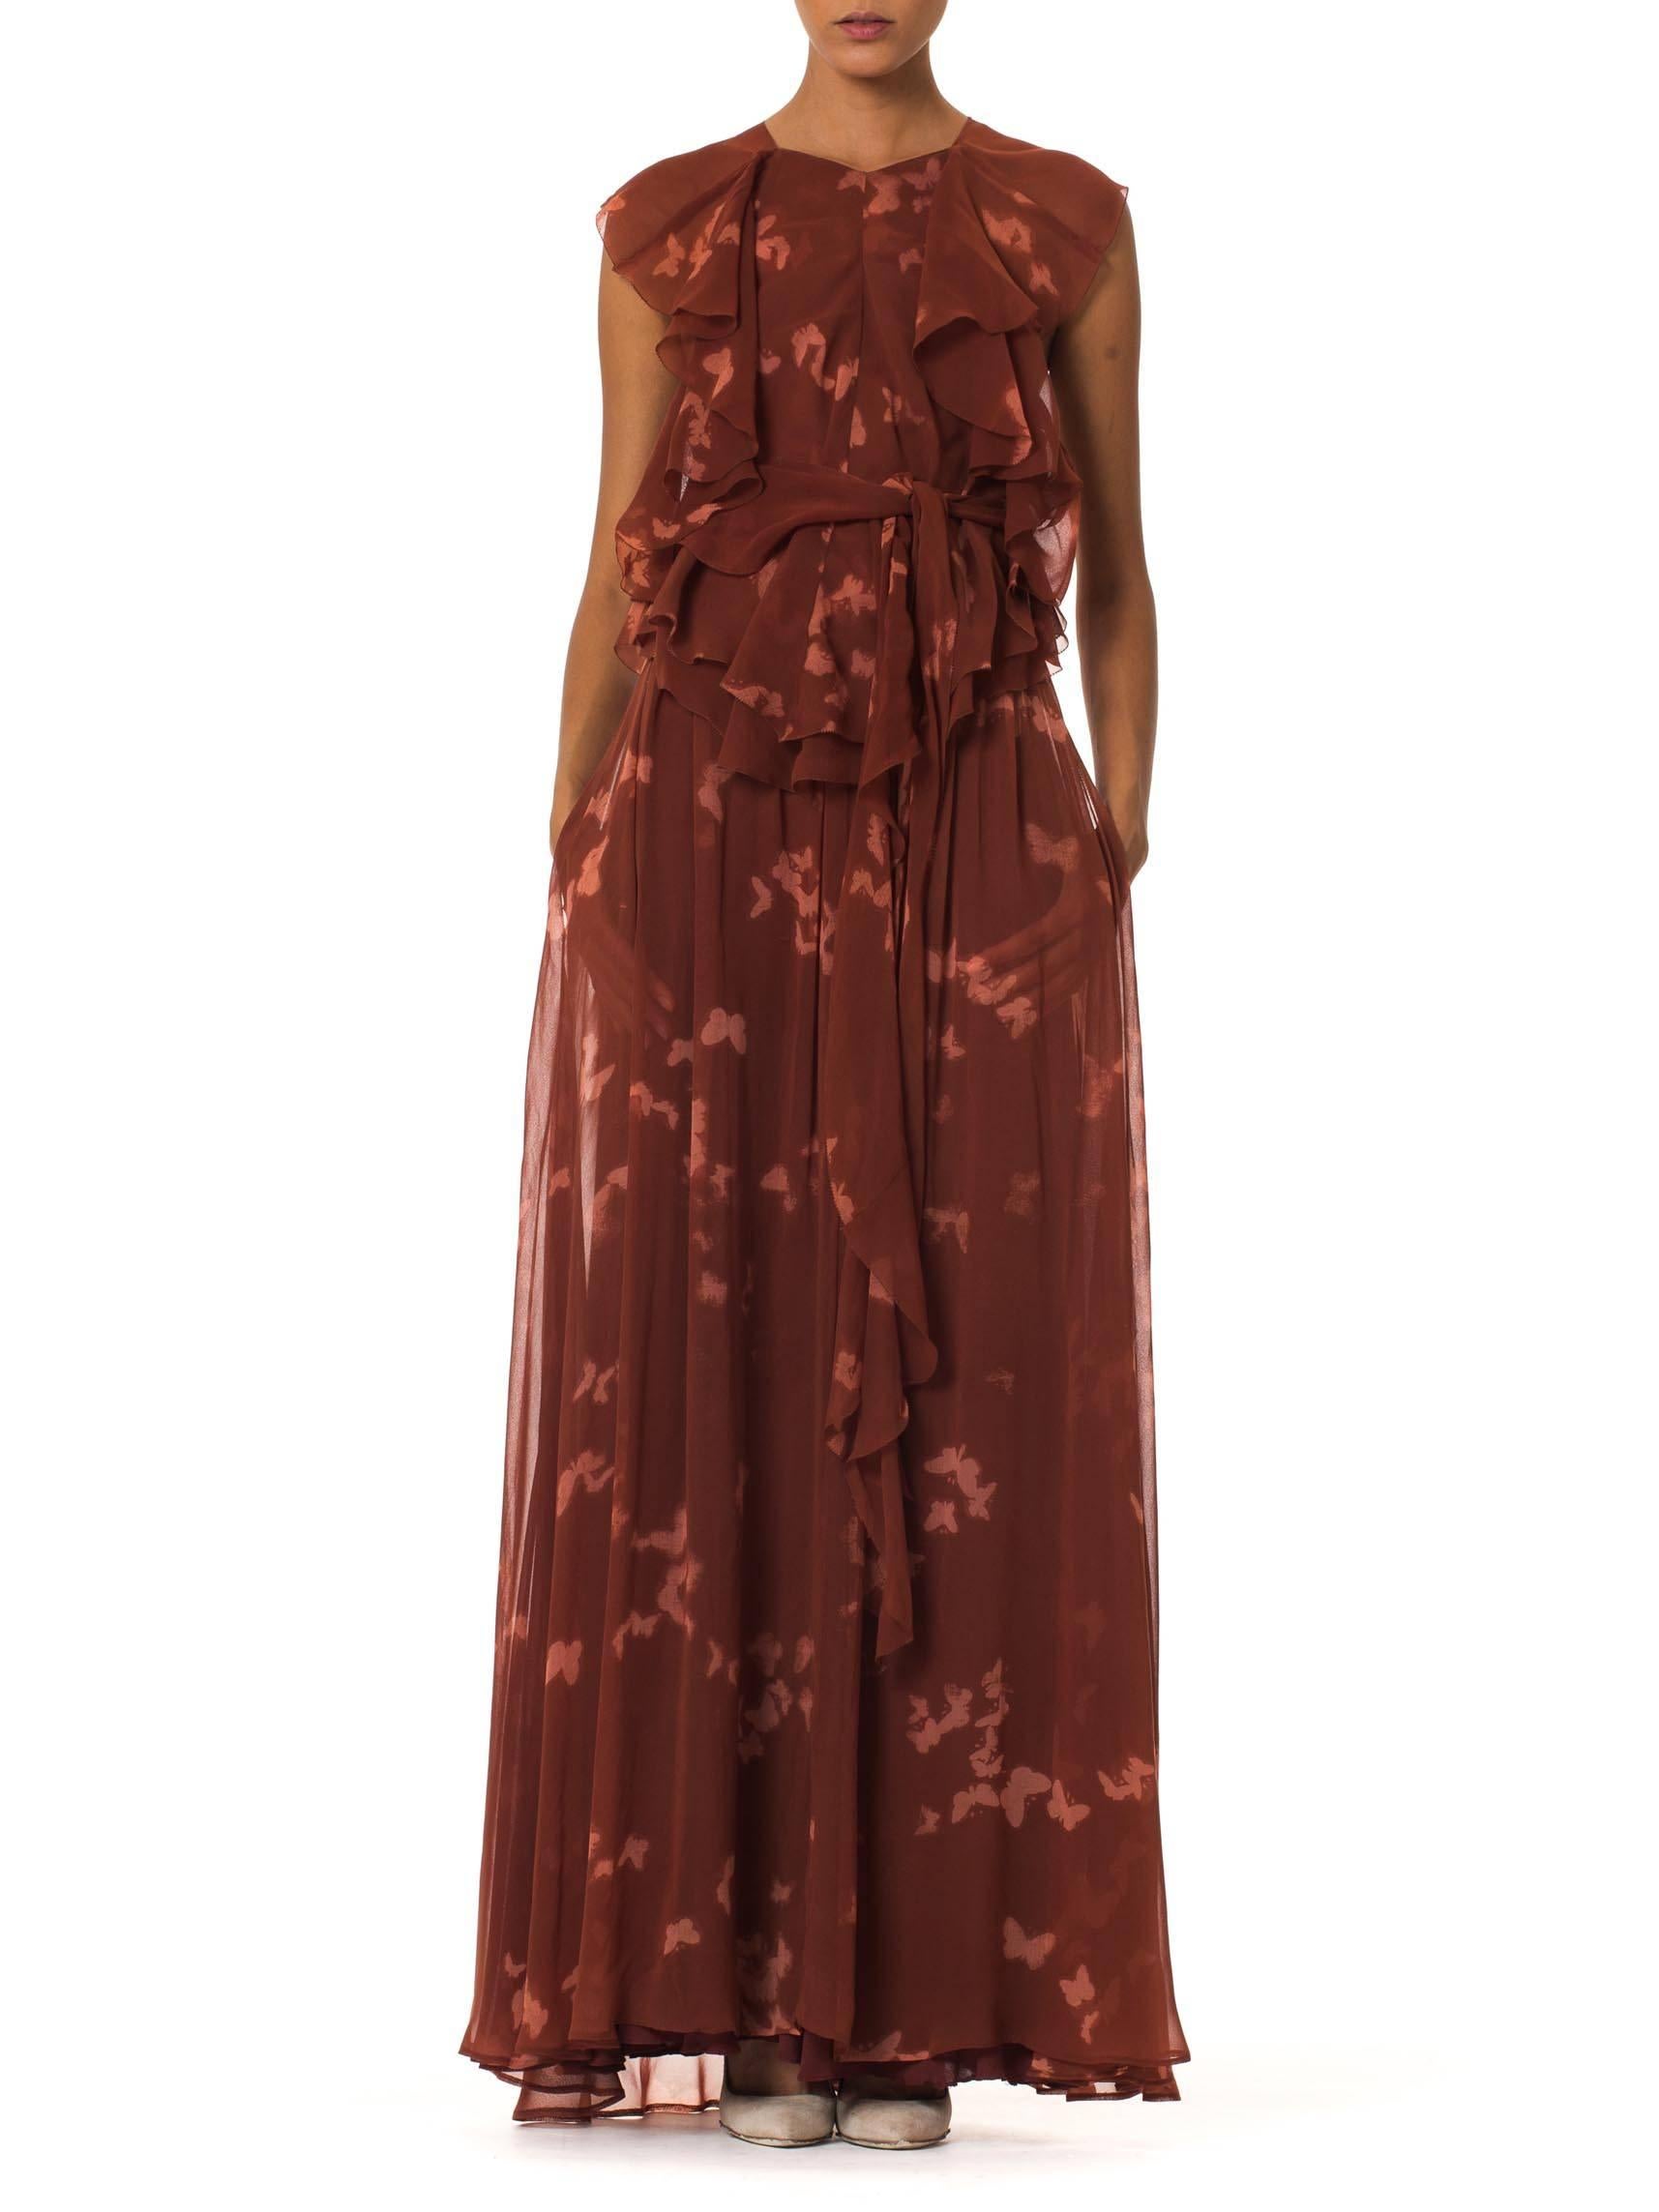 This is a gorgeous blouse and skirt set by Holly's Harp, printed all over with the white silhouettes of butterflies. Made of an earthy red chiffon, both garments are constructed of several layers of the fluttering sheer to allow light and air to